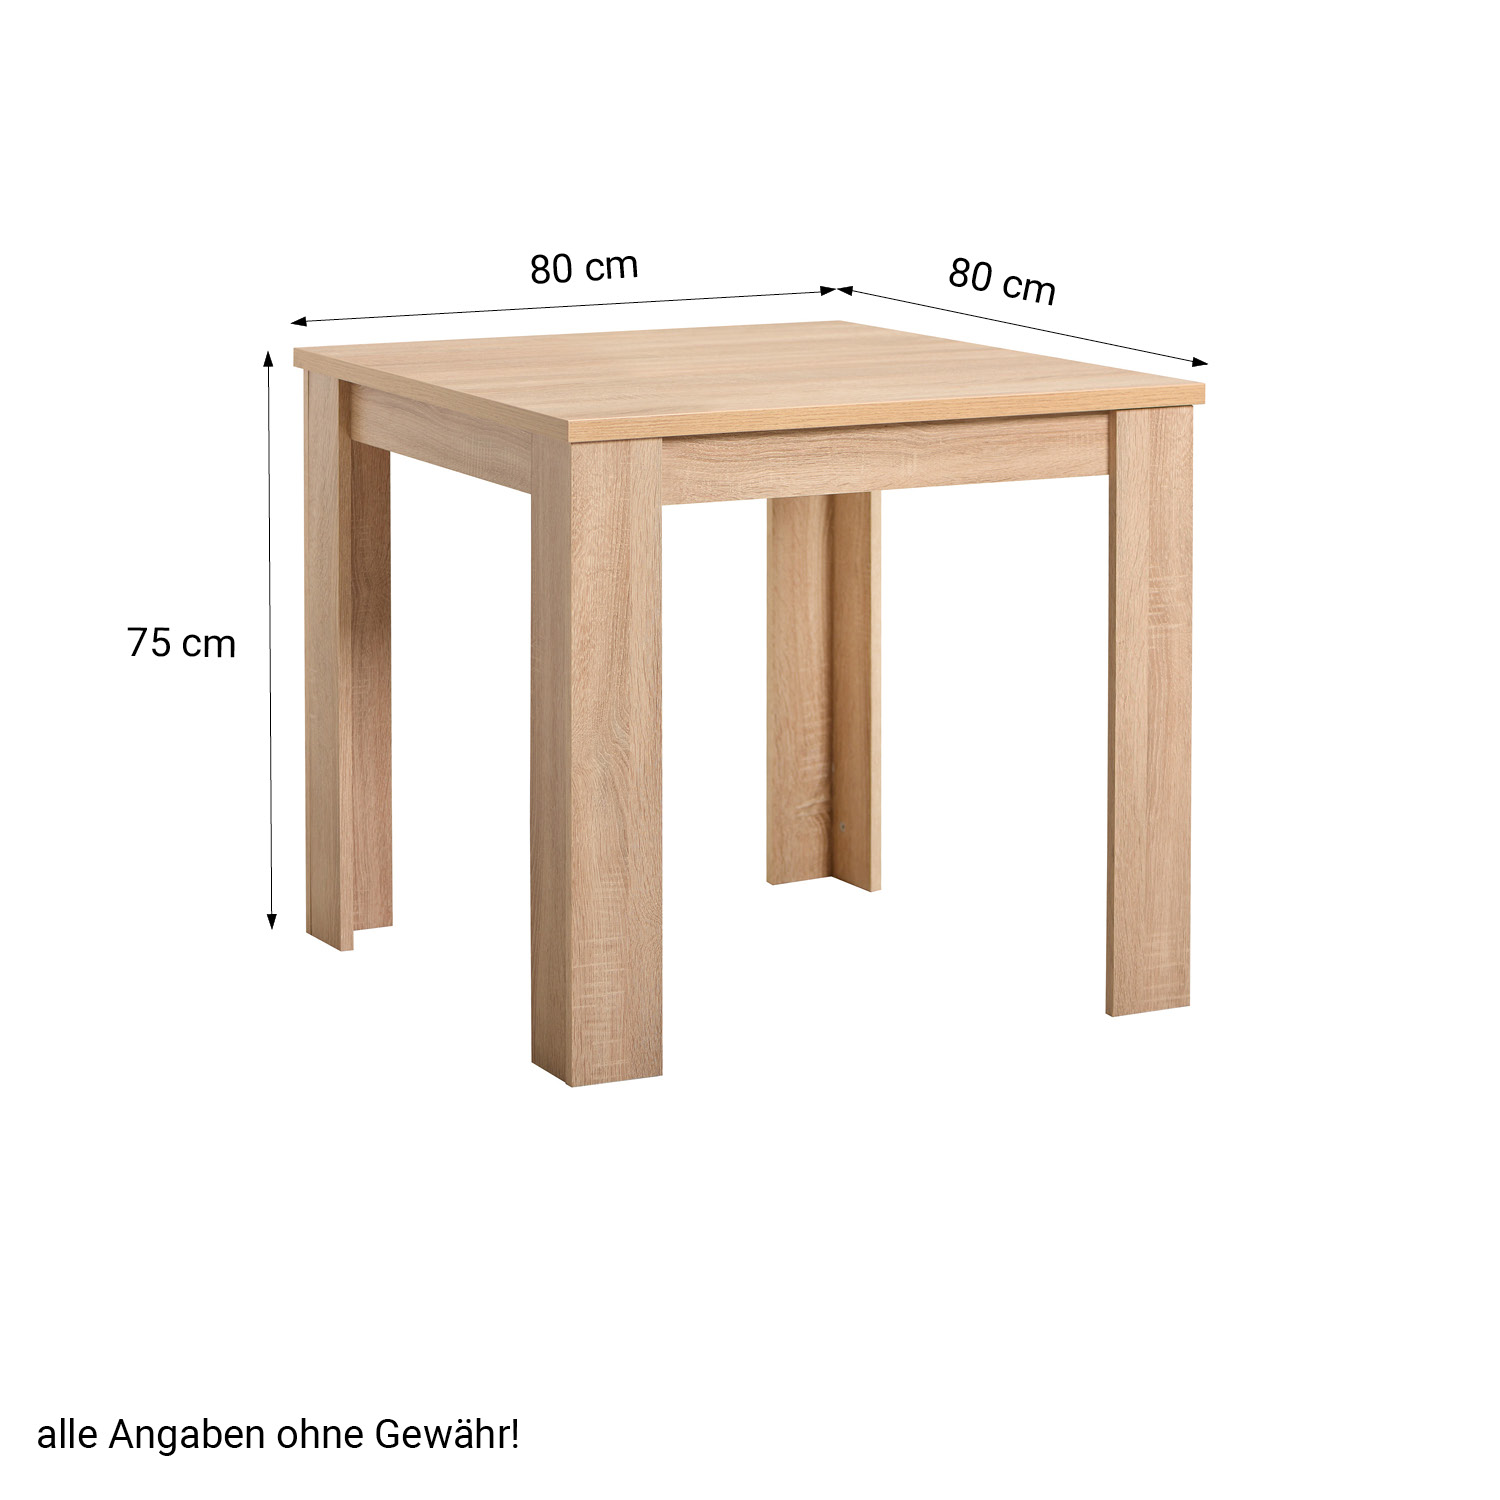 Dining Table White Natural 80x80 120x80 cm Wooden Table Kitchen Table Wood Solid Oak